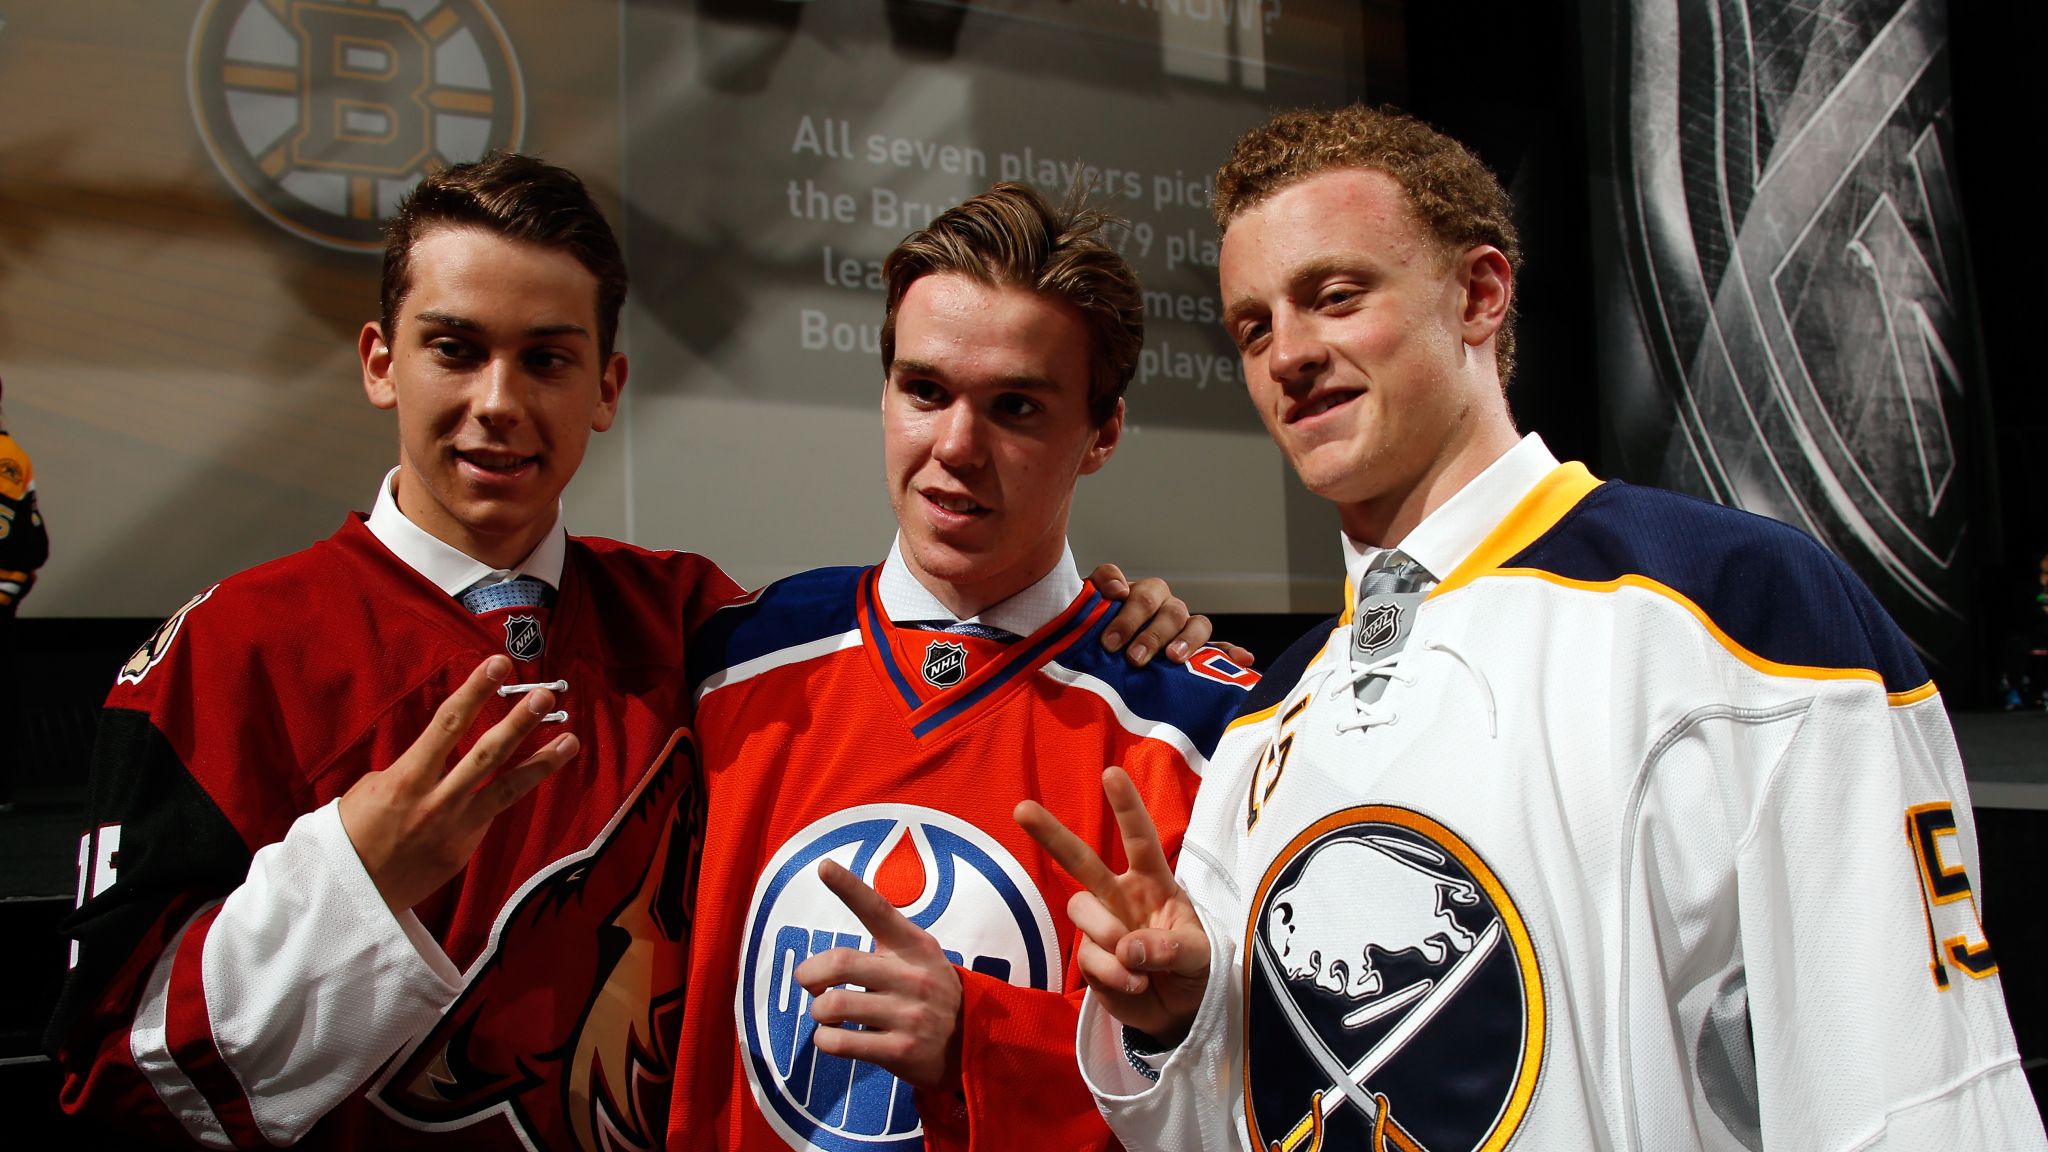 Edmonton Oilers select Connor McDavid first overall in NHL draft Ice Hockey News Sky Sports